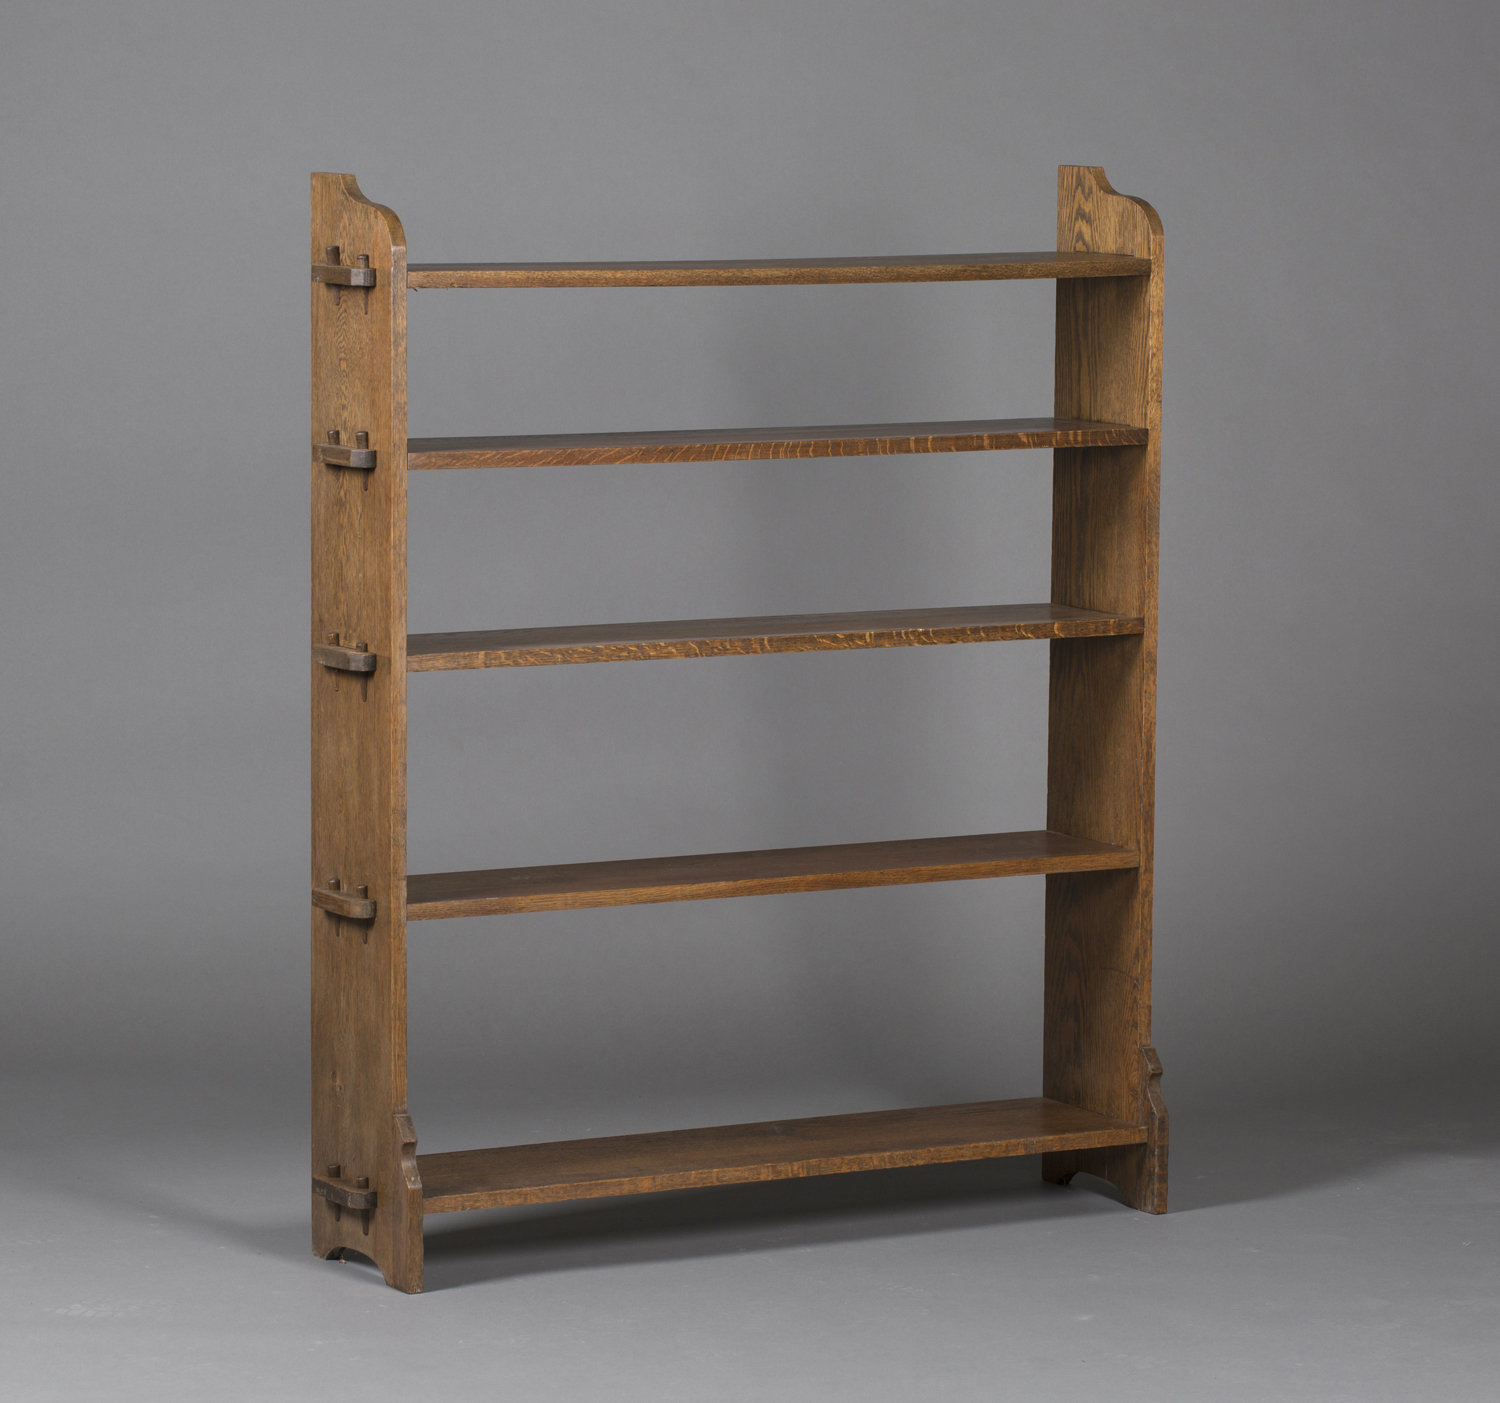 An early 20th century Arts and Crafts style oak five-tier open bookcase, in the manner of